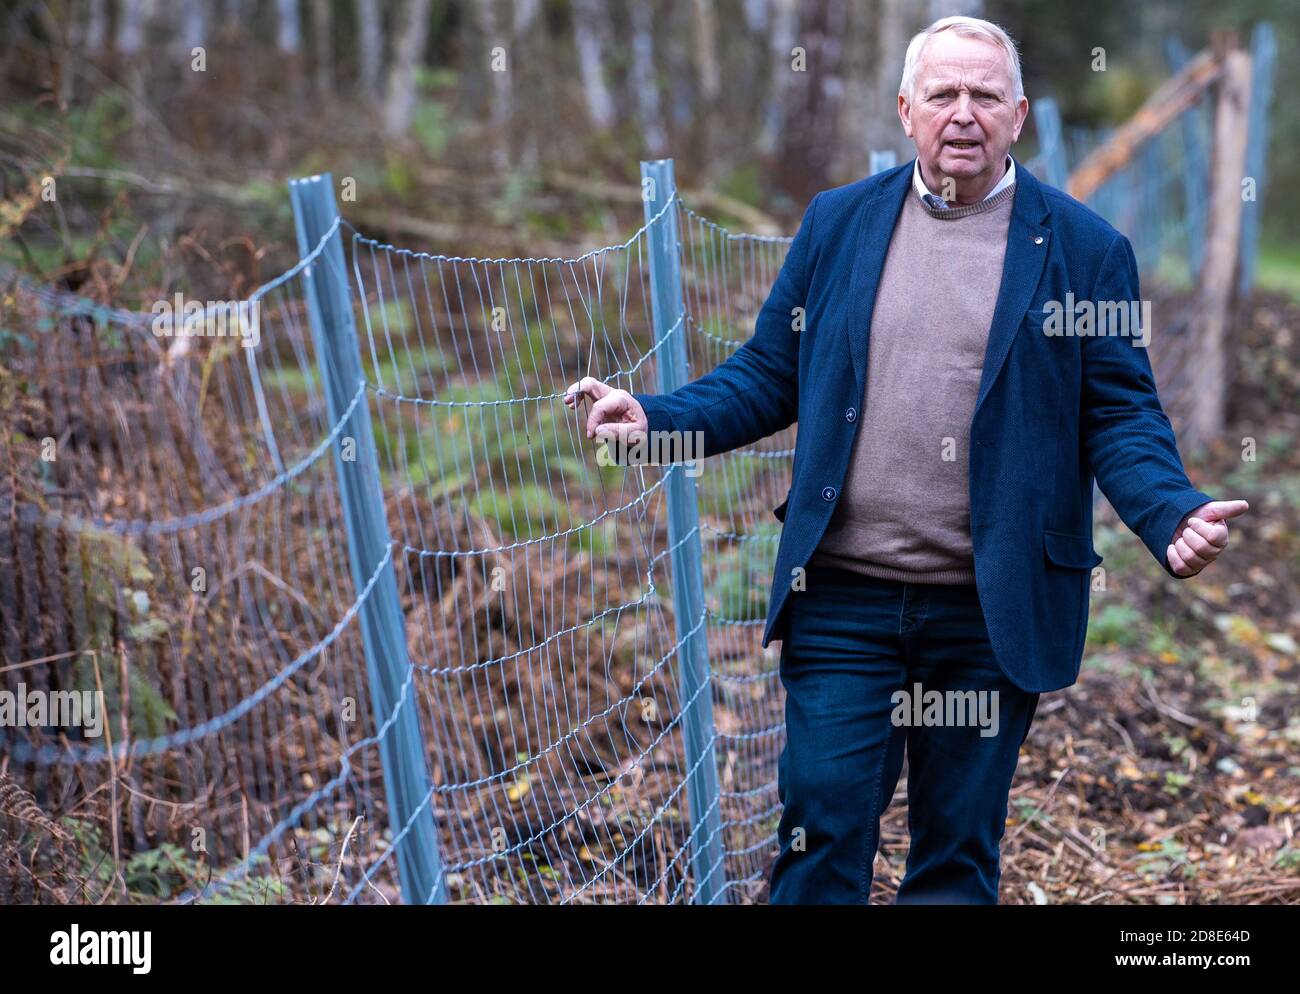 22 October 2020, Mecklenburg-Western Pomerania, Korswandt: Till Backhaus (SPD), the Minister of Agriculture of Mecklenburg-Vorpommern, is standing at the border between Poland and Germany at the new protective fence to guard against swine fever. A metal fence is to prevent the overflow of wild boars in case African swine fever (ASP) spreads along the coast. The wild boar fence for protection against swine fever at the border to Poland is halfway finished in Mecklenburg-Western Pomerania. To prevent the introduction of the animal disease, which is widespread in Poland, the state is erecting the Stock Photo